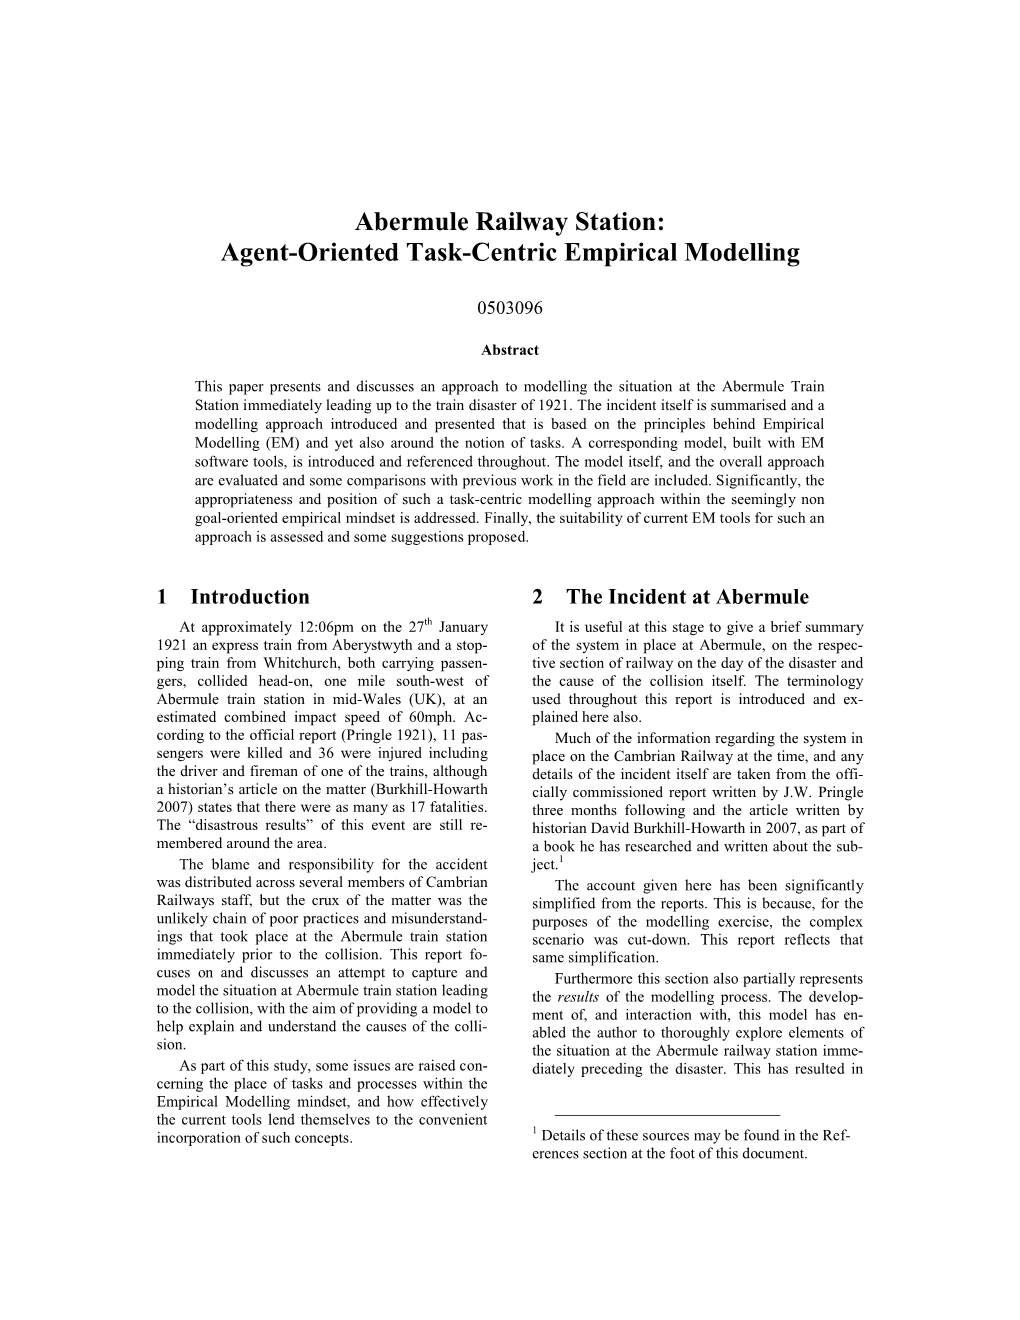 Abermule Railway Station: Agent-Oriented Task-Centric Empirical Modelling